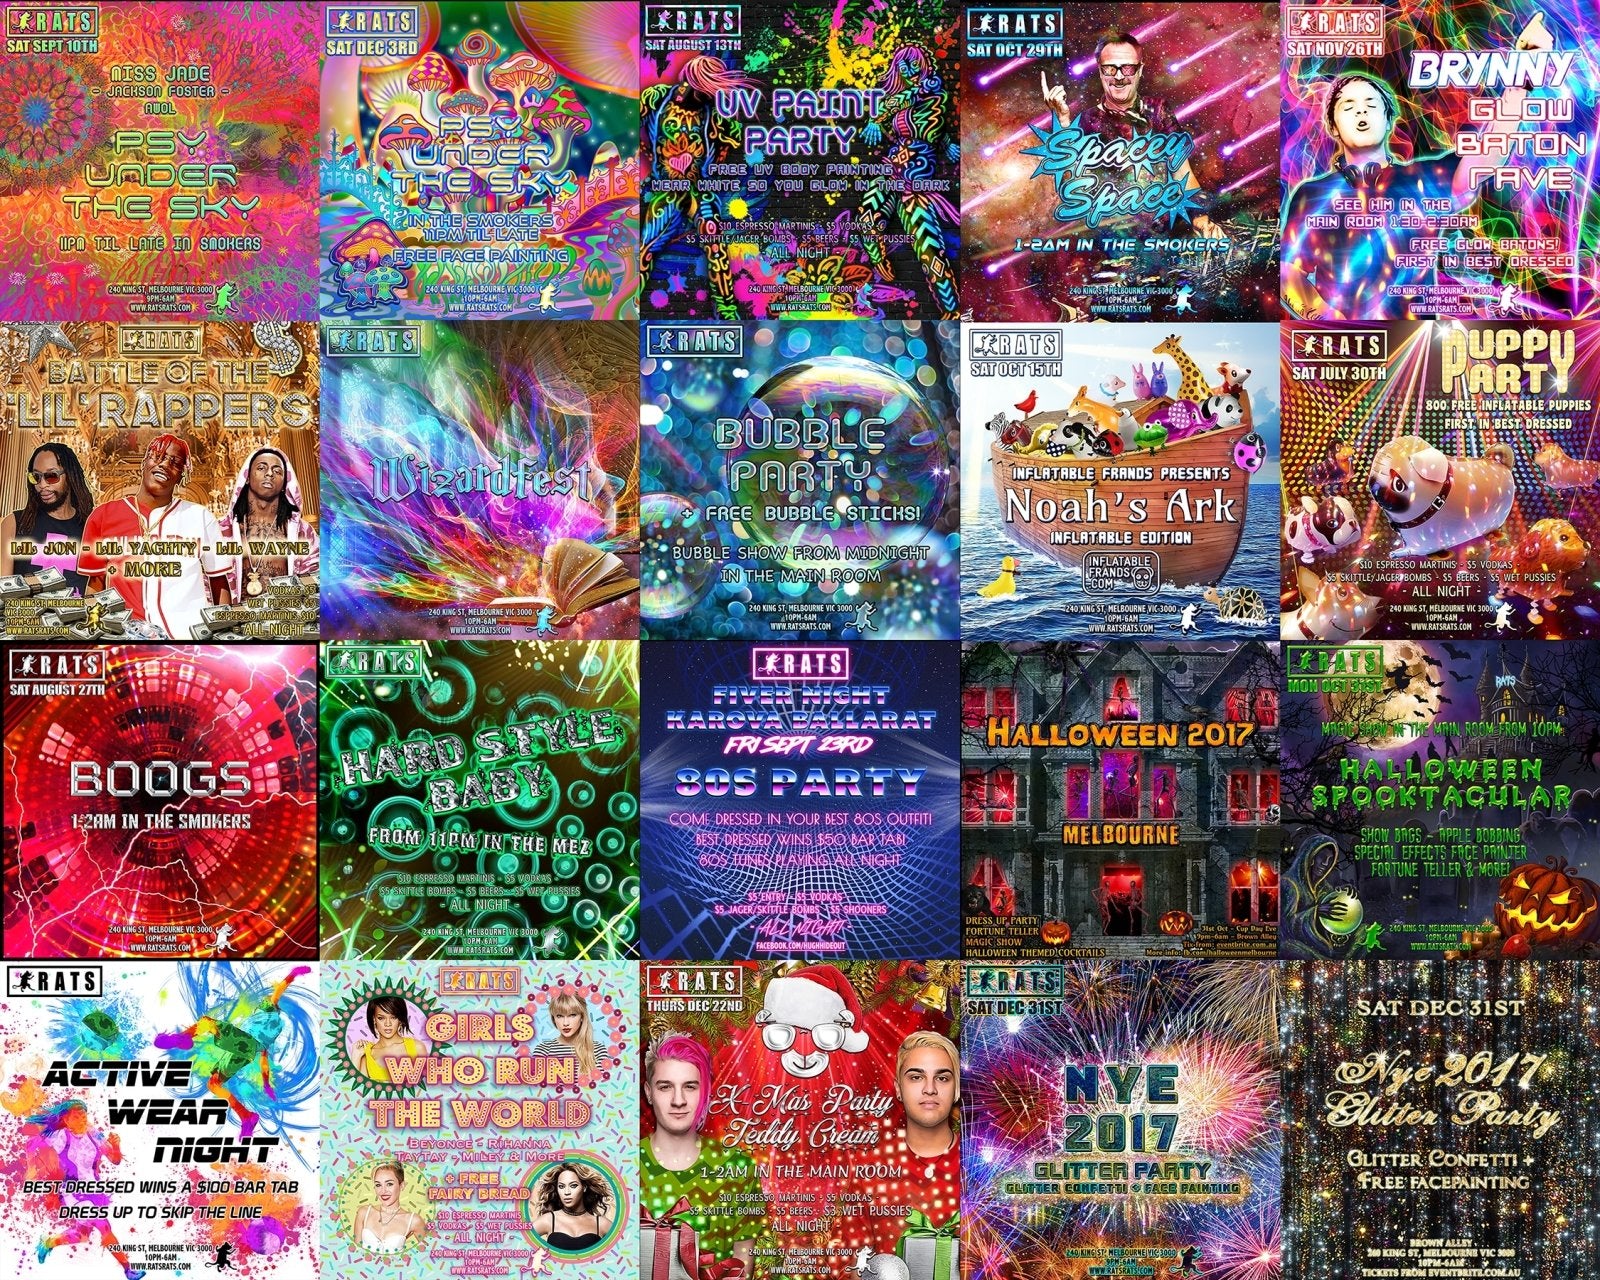 Social Media art and graphic design, banners, posts and posters for nightclubs, events, parties, bars, and festivals.